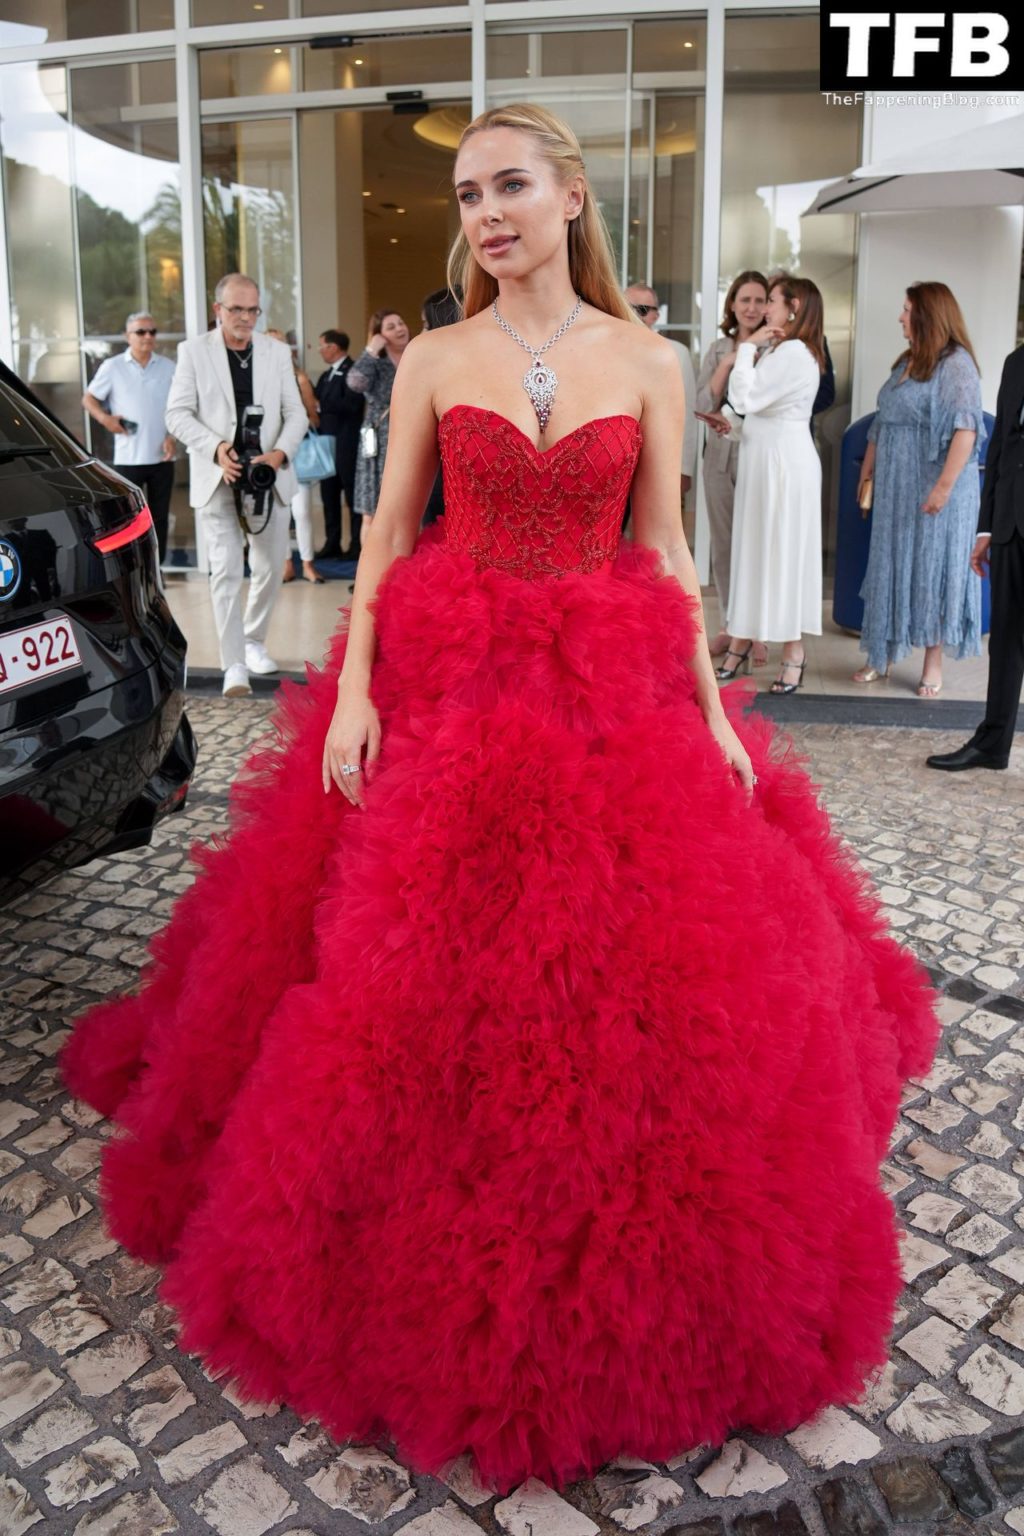 Kimberley Garner Looks Hot in a Red Dress at the 75th Annual Cannes Film Festival (134 Photos)